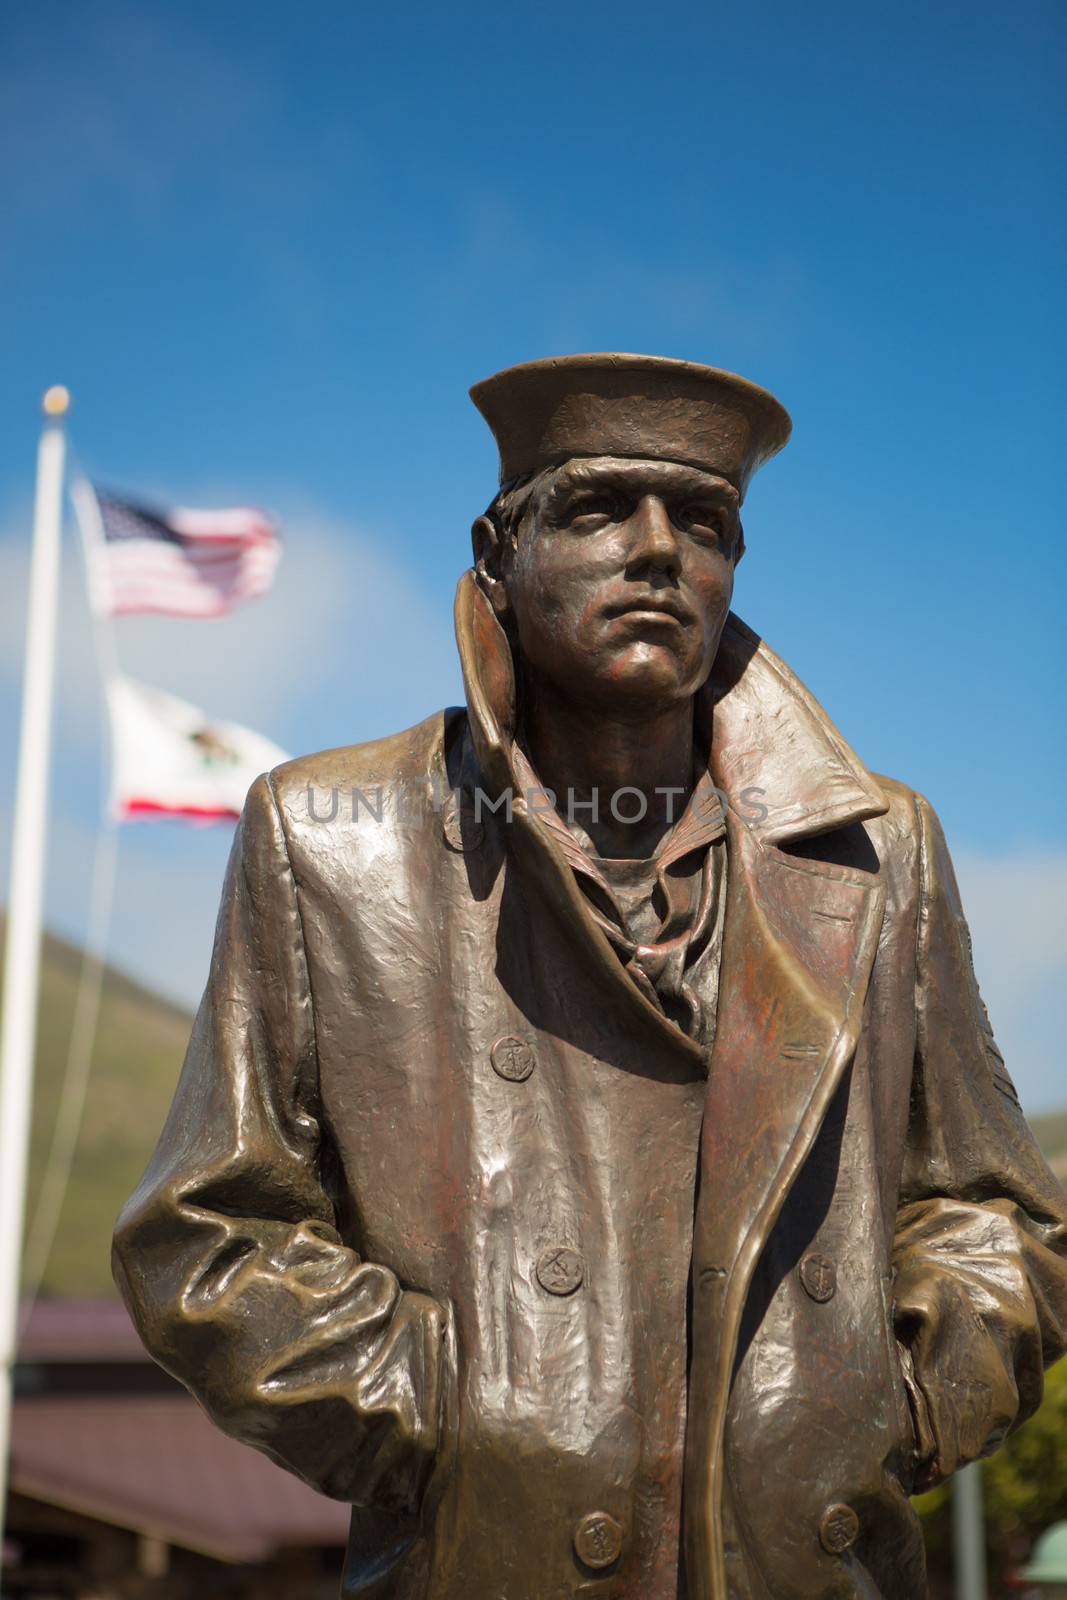 Statue the Sailor and the flags of the United States at the Golden Gate Bridge lookout area within the San Francisco Bay. United States 2012.